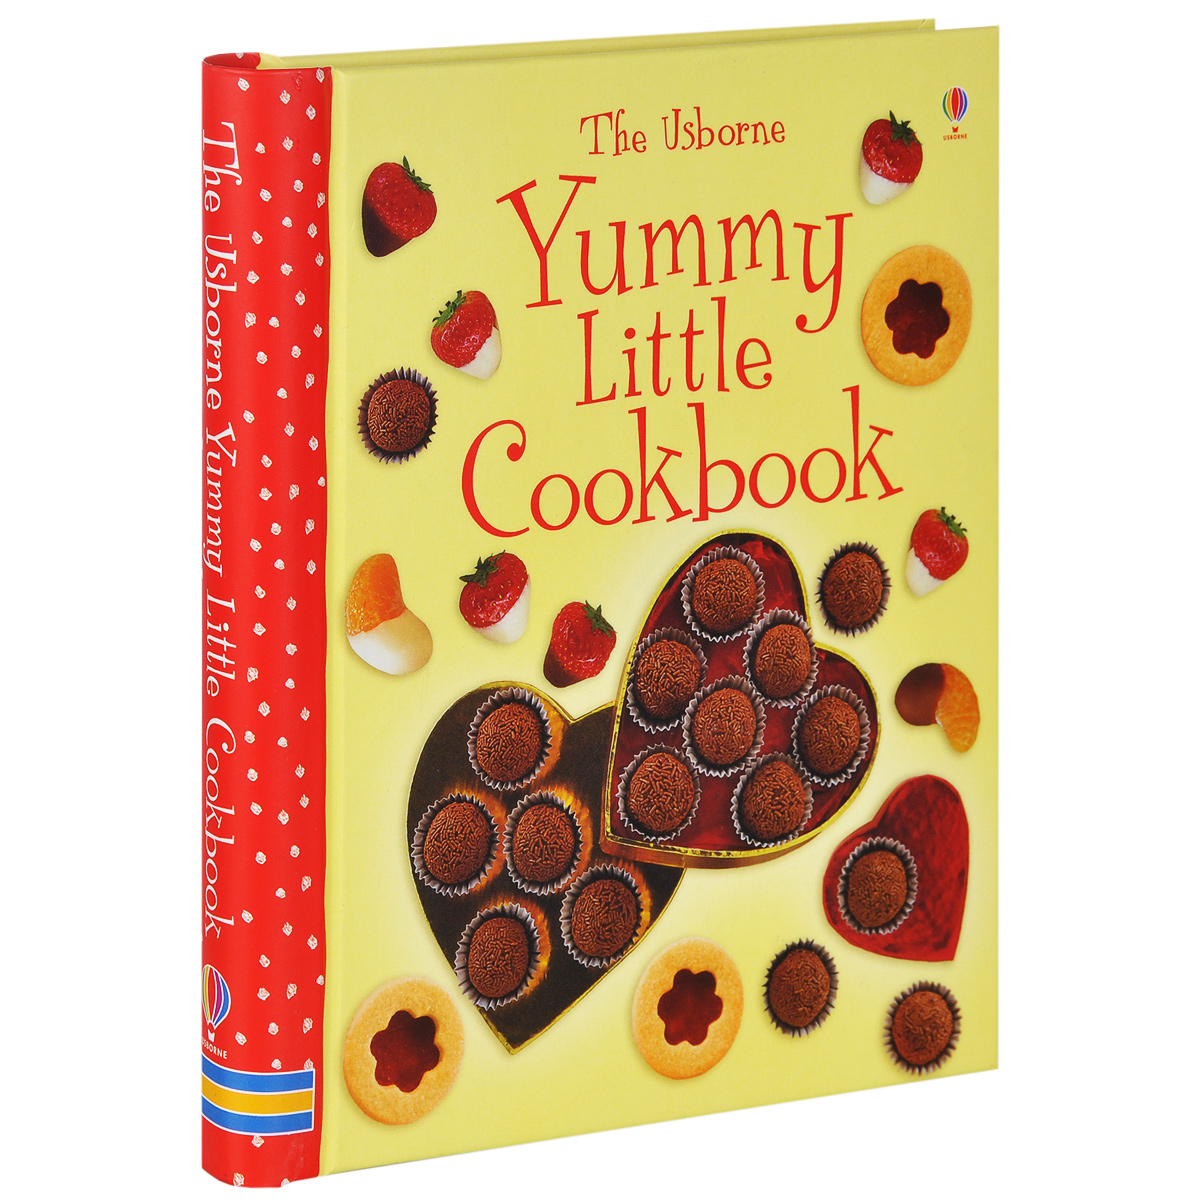 Yummy Little Cookbook - Rebecca Gilpin, Catherine Atkinson12296407This is a delightful little spiral-bound cookbook, featuring over 40 tasty treats to make at home. Packed with recipes for delicious goodies including chocolate truffles, coconut mice, peppermint creams and fruit bread, this book will give cooks both young and old plenty of inspiration in the kitchen. Recipes are accompanied by illustrated step-by-step instructions and clear illustrations. Beautiful colour photographs show the mouth-watering end results.